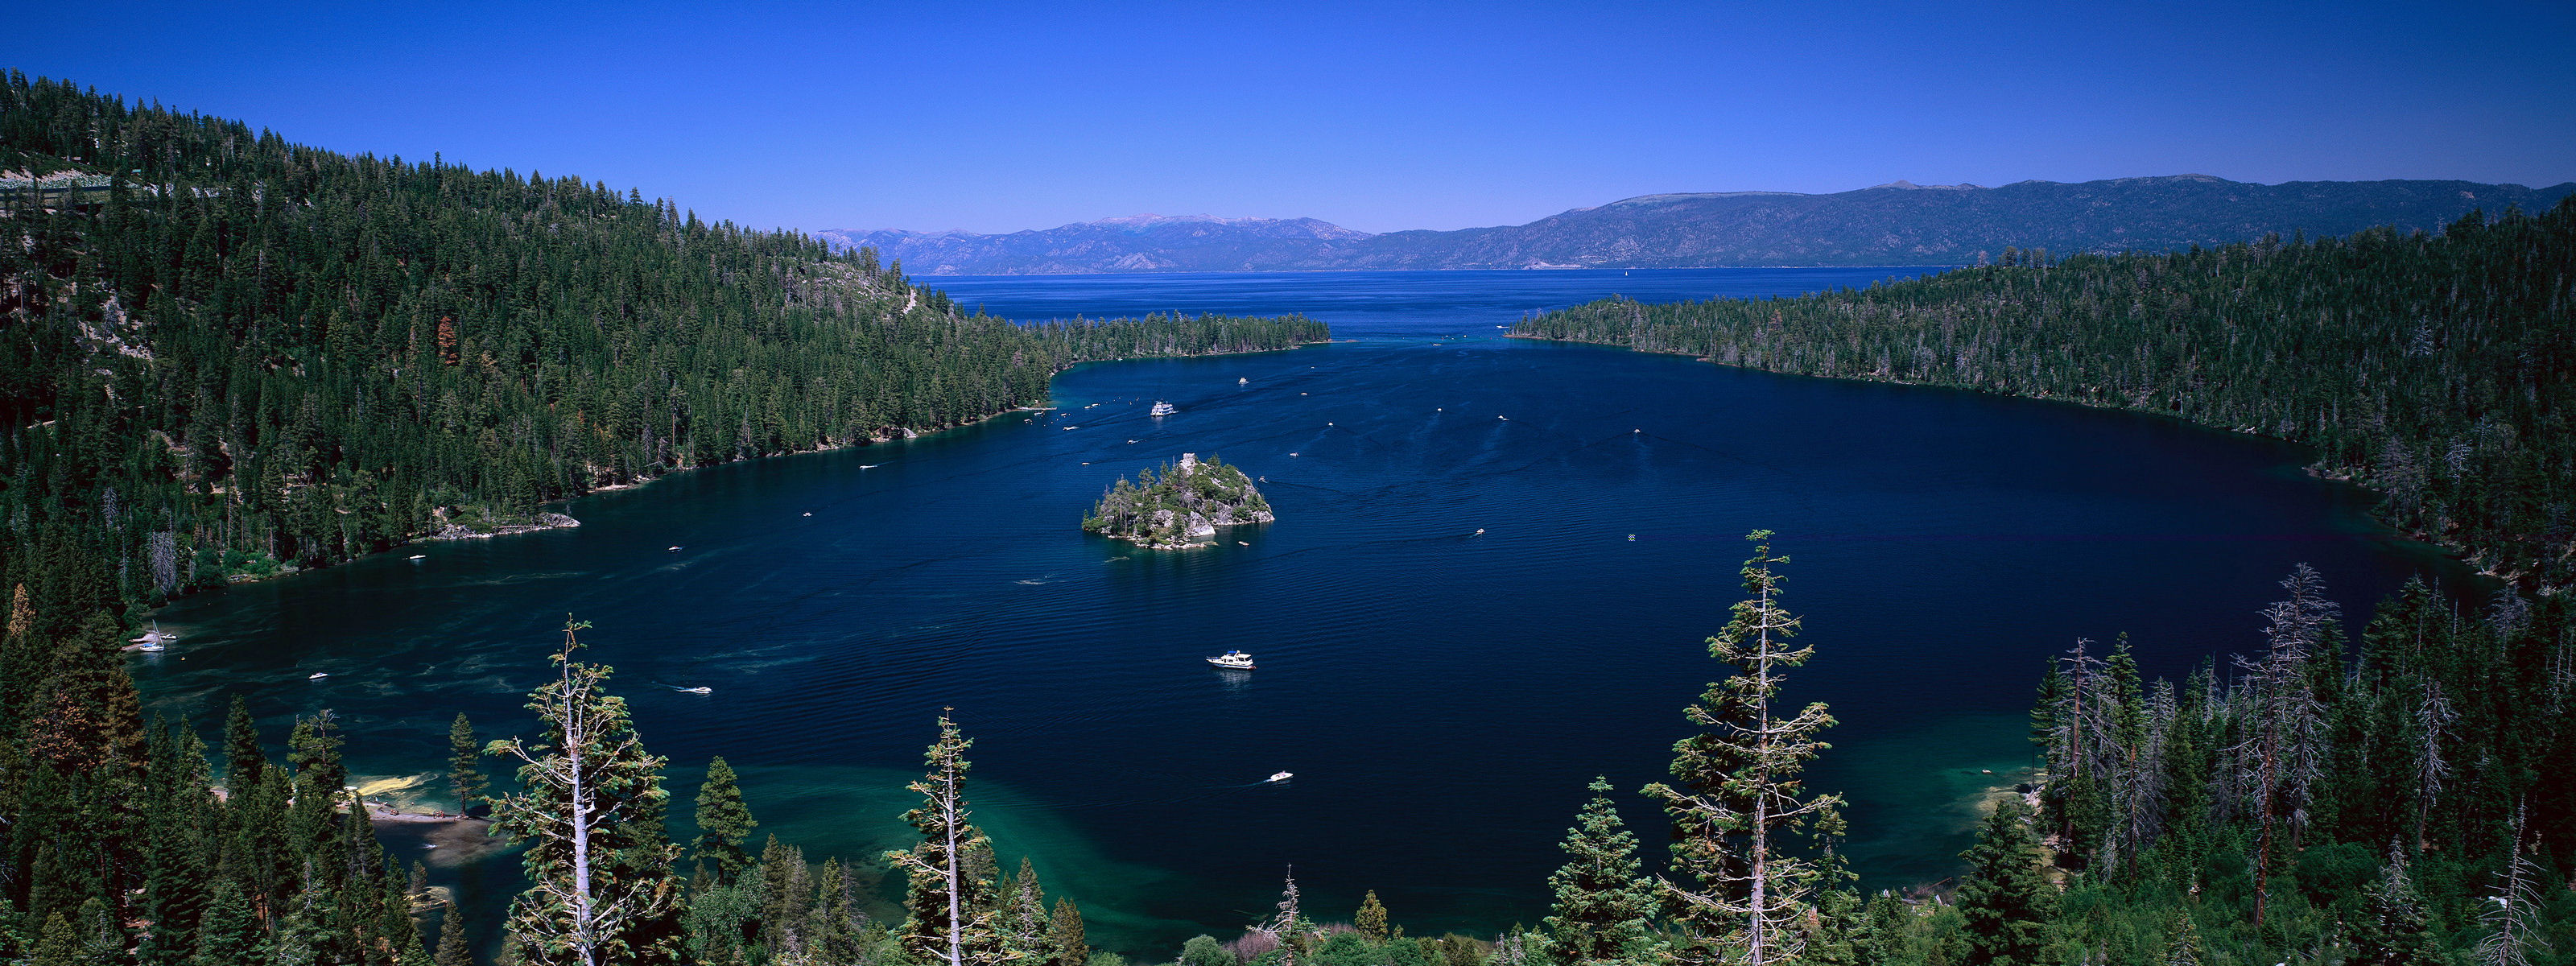 mountains, Landscapes, Forest, Islands, Boats, Vehicles, Multiscreen, Lake, Tahoe, Emerald, Bay Wallpaper